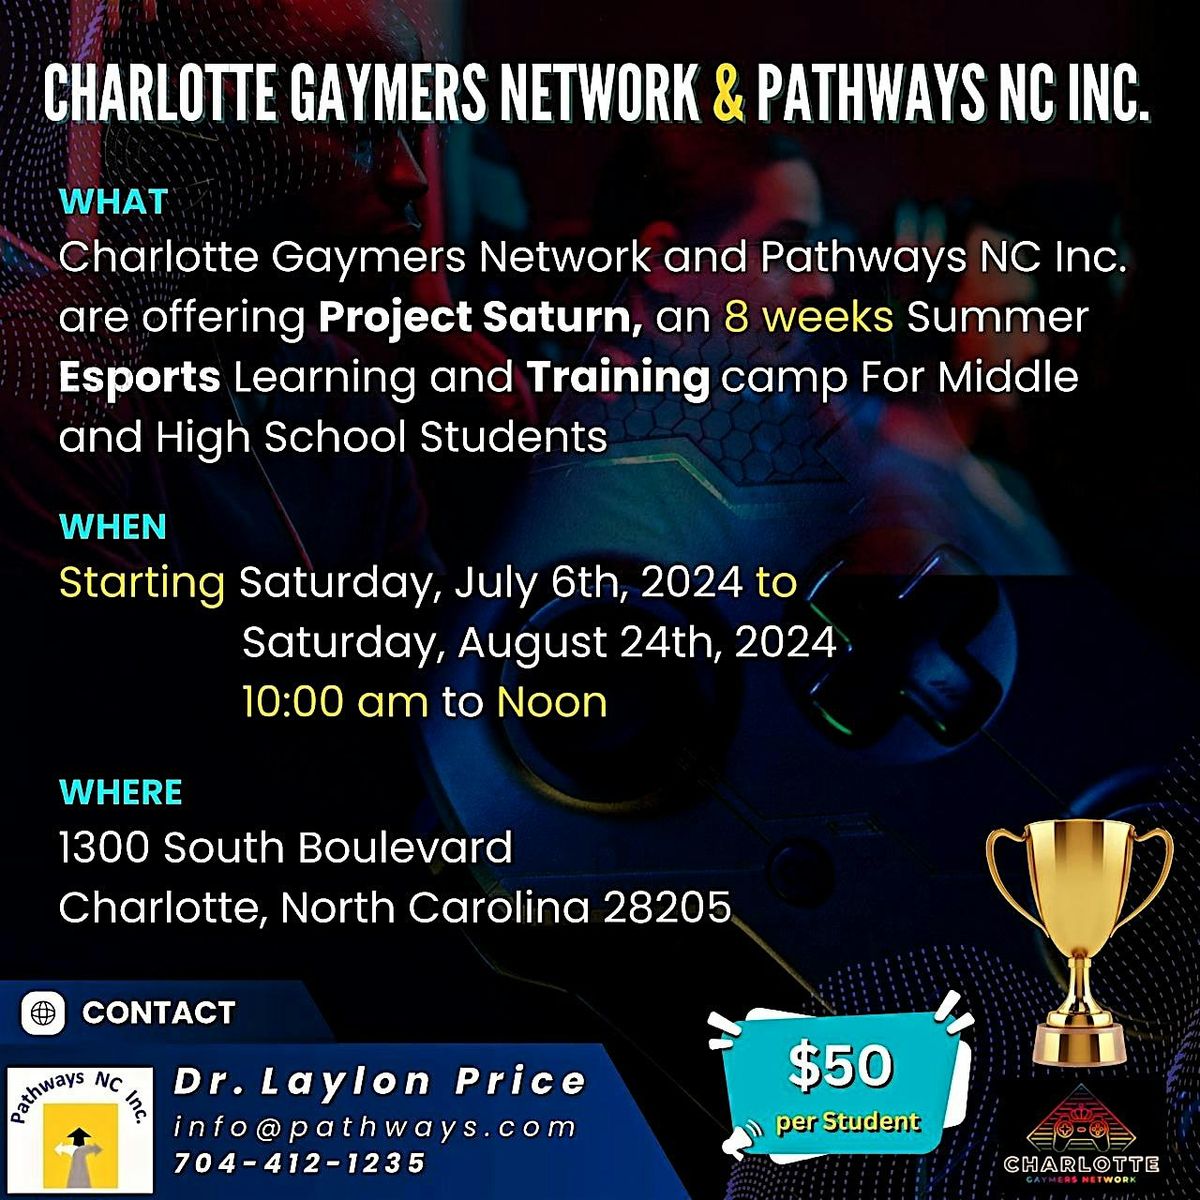 8-Weeks Summer Esports Learning and Training Saturday Camp for Students